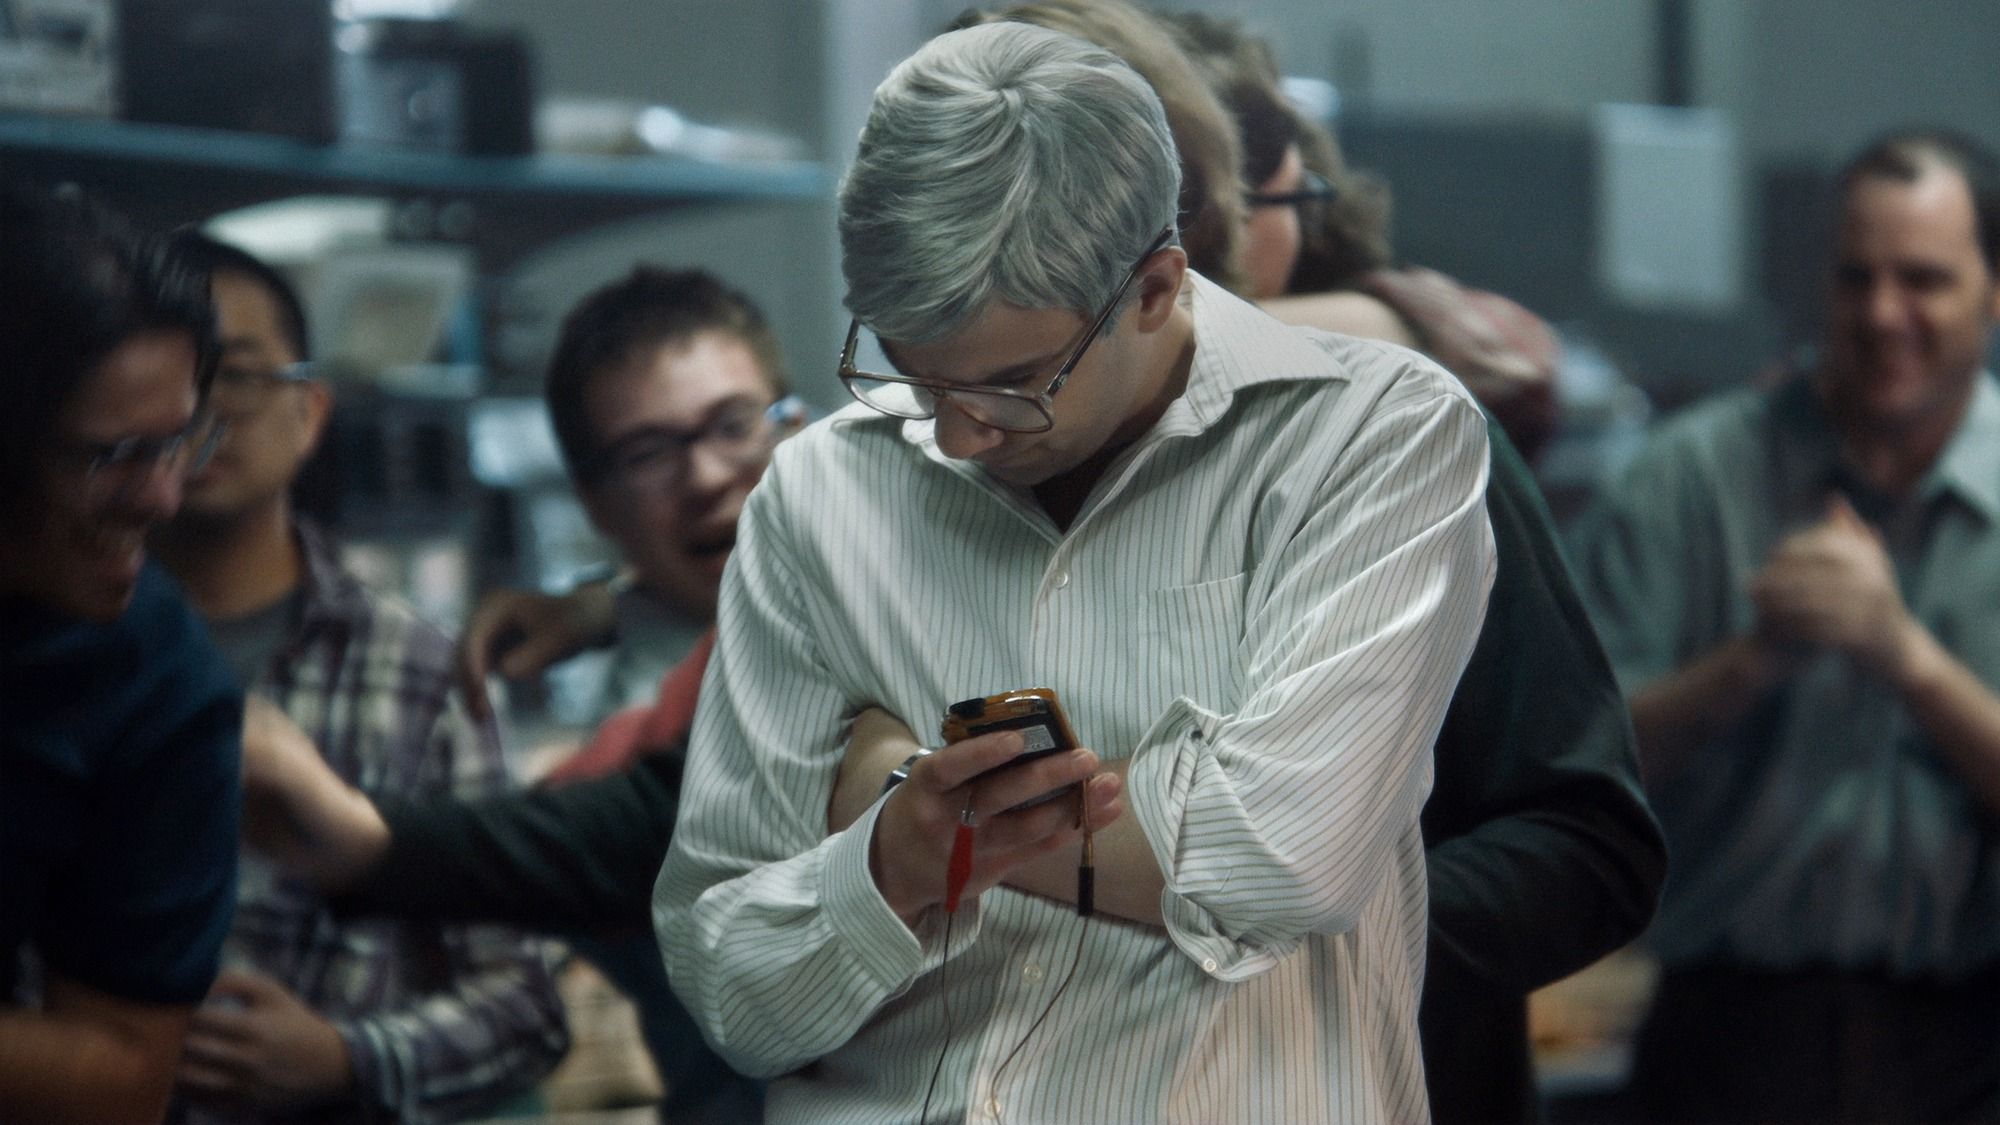 'BlackBerry' movie trailer lets you relive the smartphone's chaotic